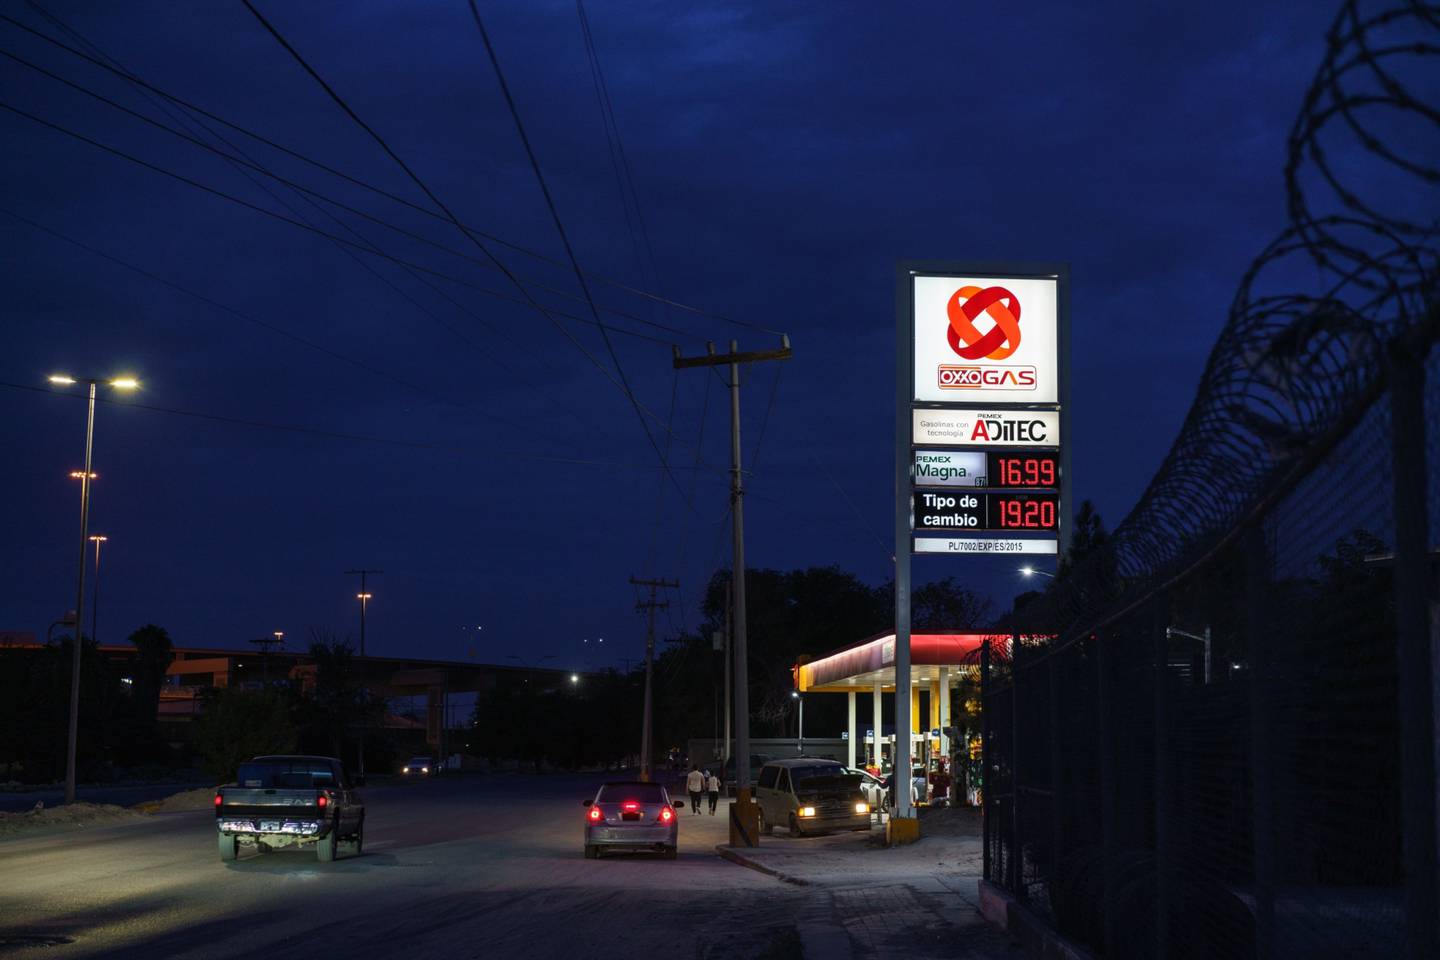 An Oxxo gas station is pictured at night in Ciudad Jurez, Chihuahua State, Mexico on Thursday, July 21, 2022. As high gas prices in the United States have persisted, lower Mexican gas prices attract cross border customers due to a subsidy given by the Mexican government.dfd